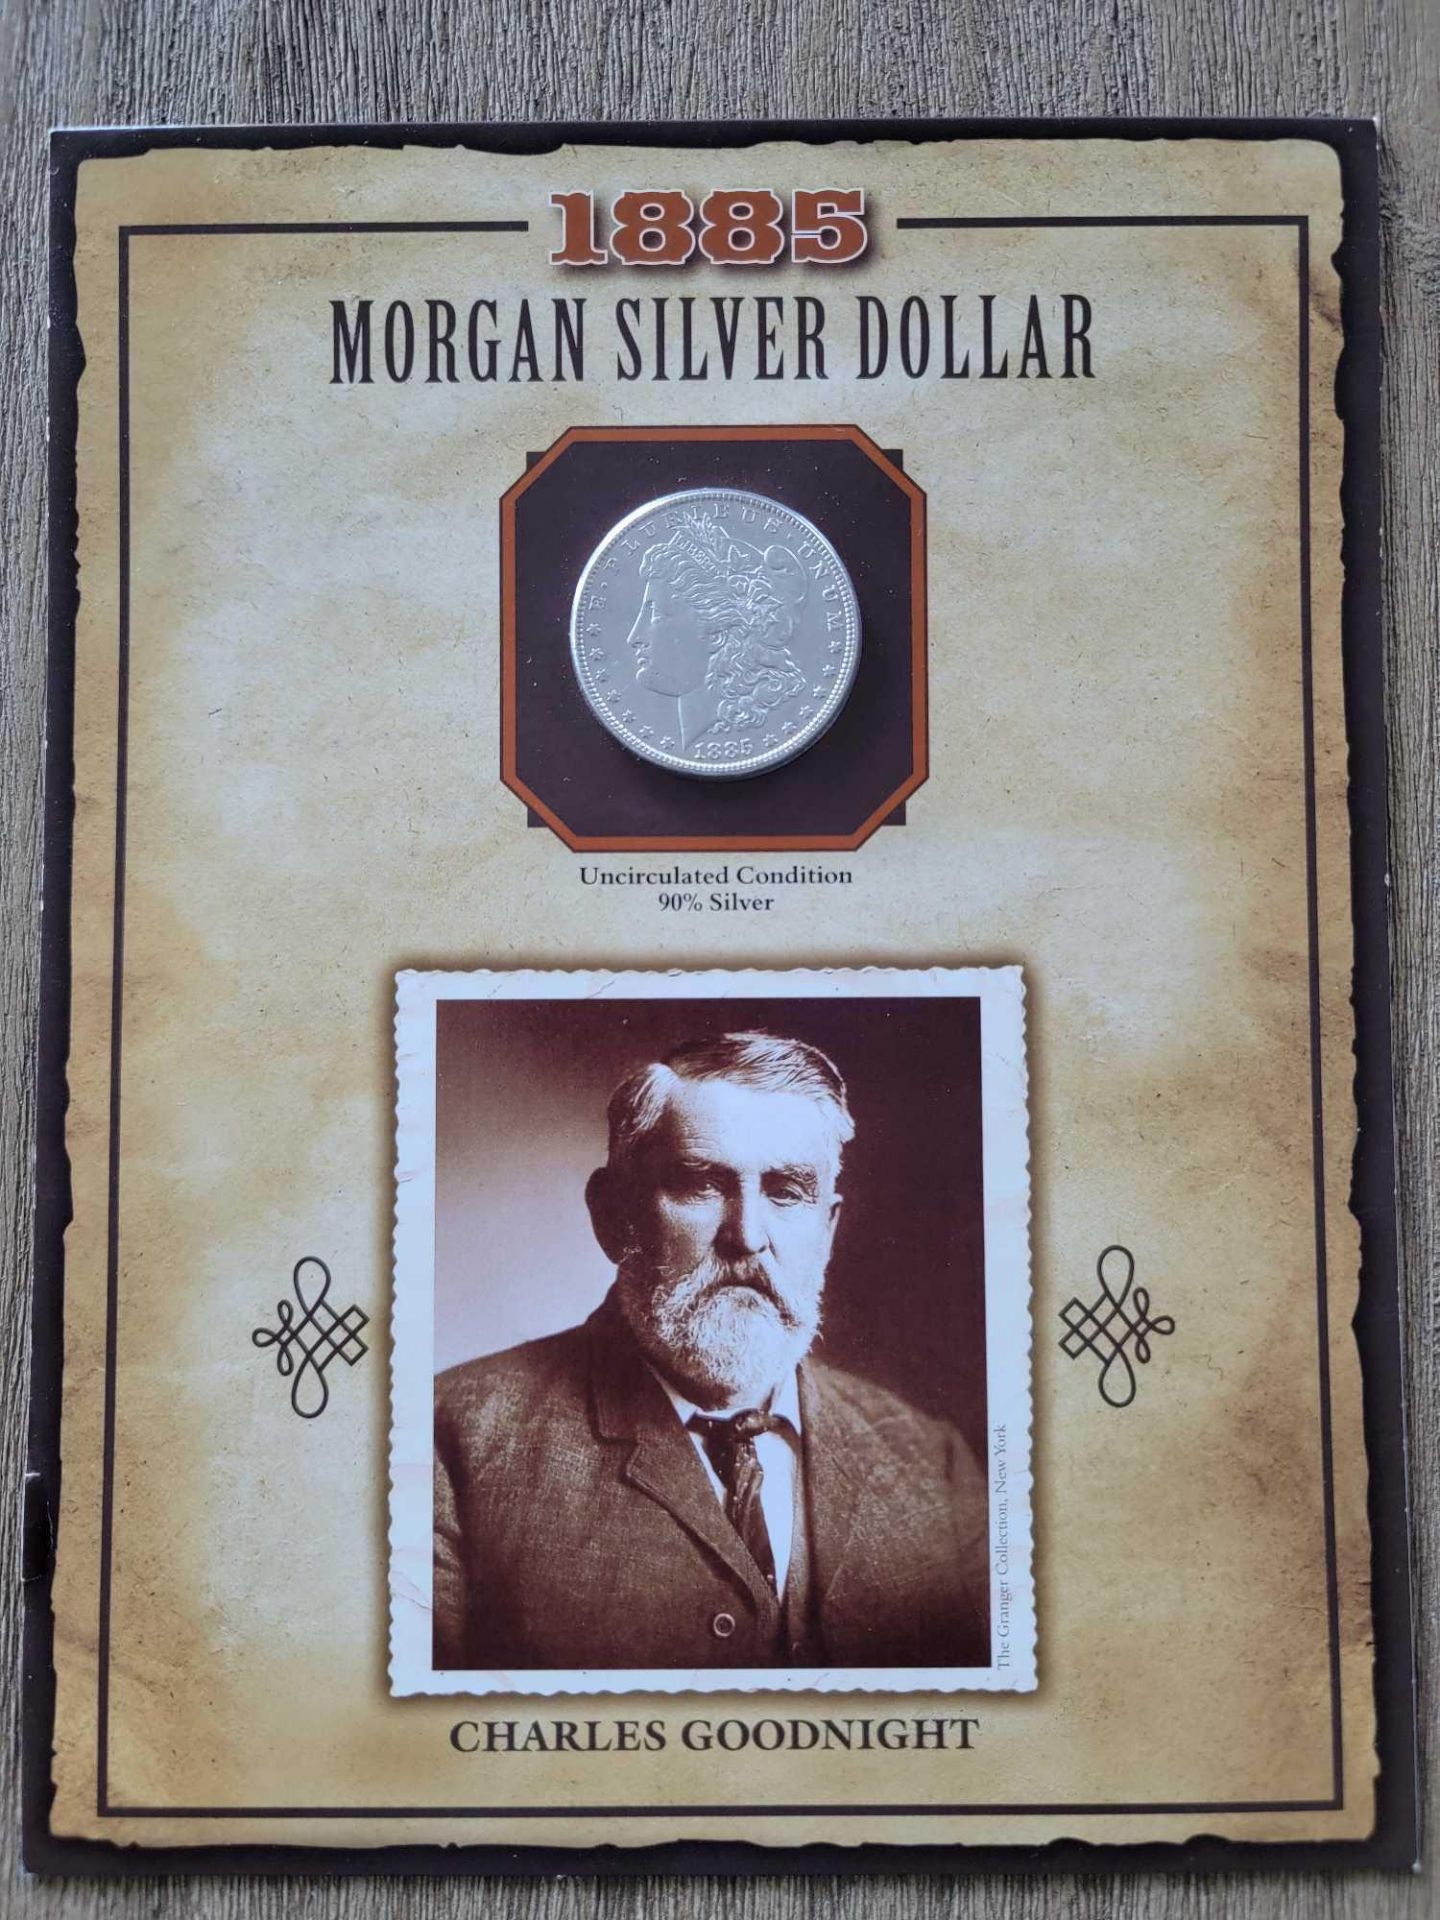 1885 Morgan Dollar with Charles Goodnight Uncirculated Condition - Image 2 of 10